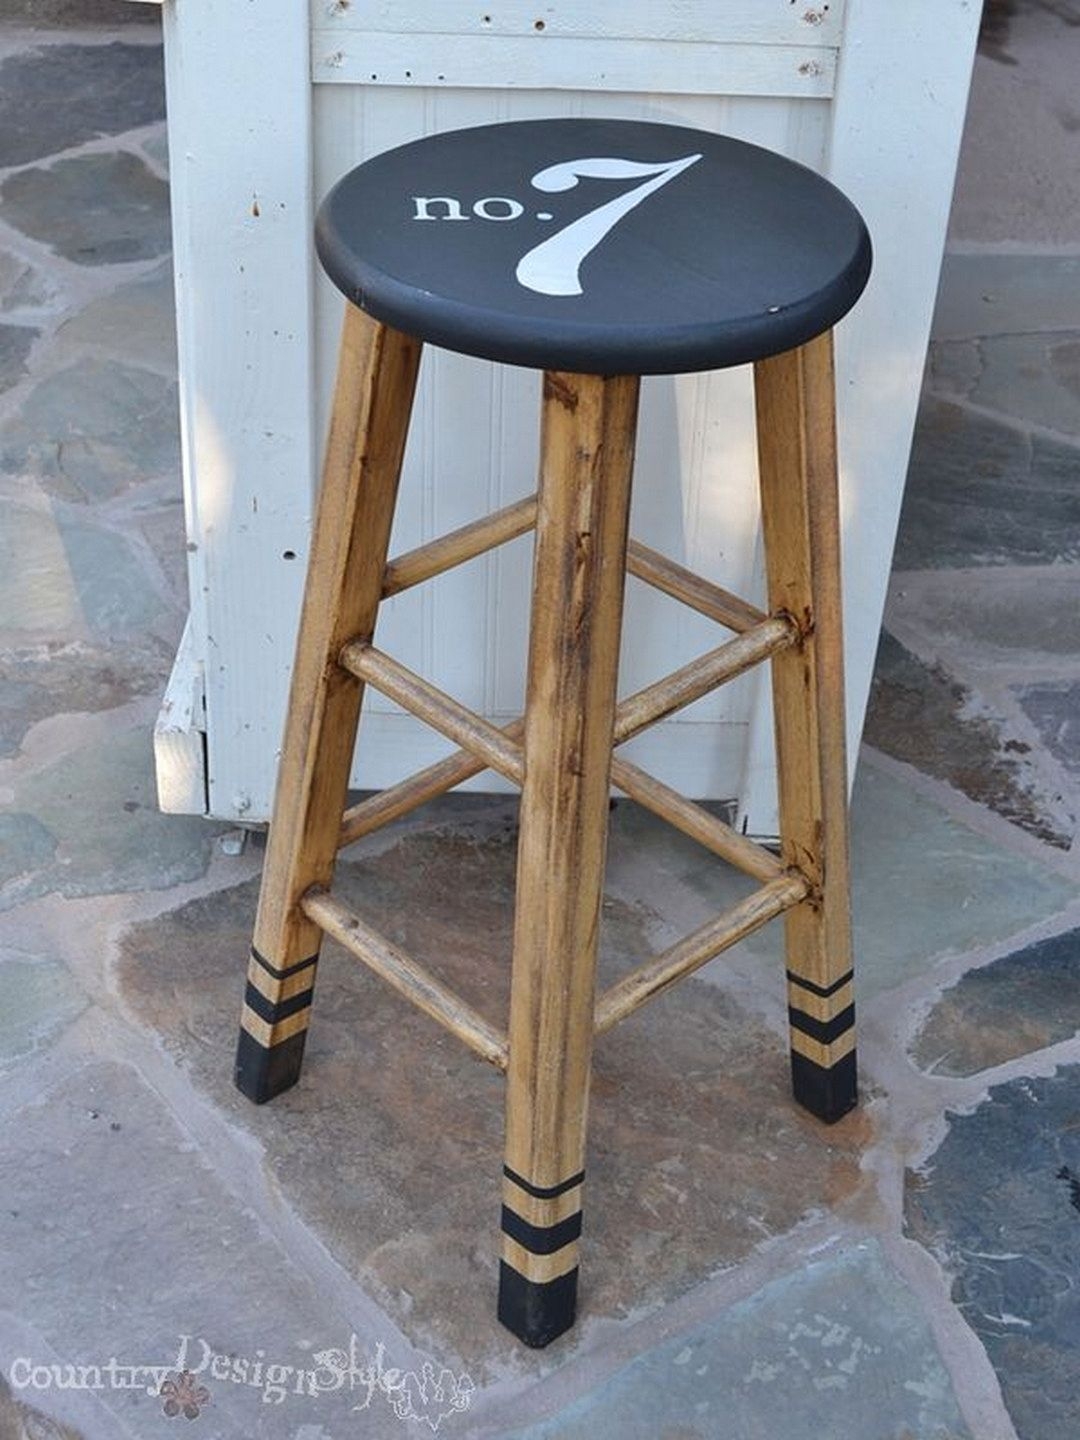 How to build a wooden stool